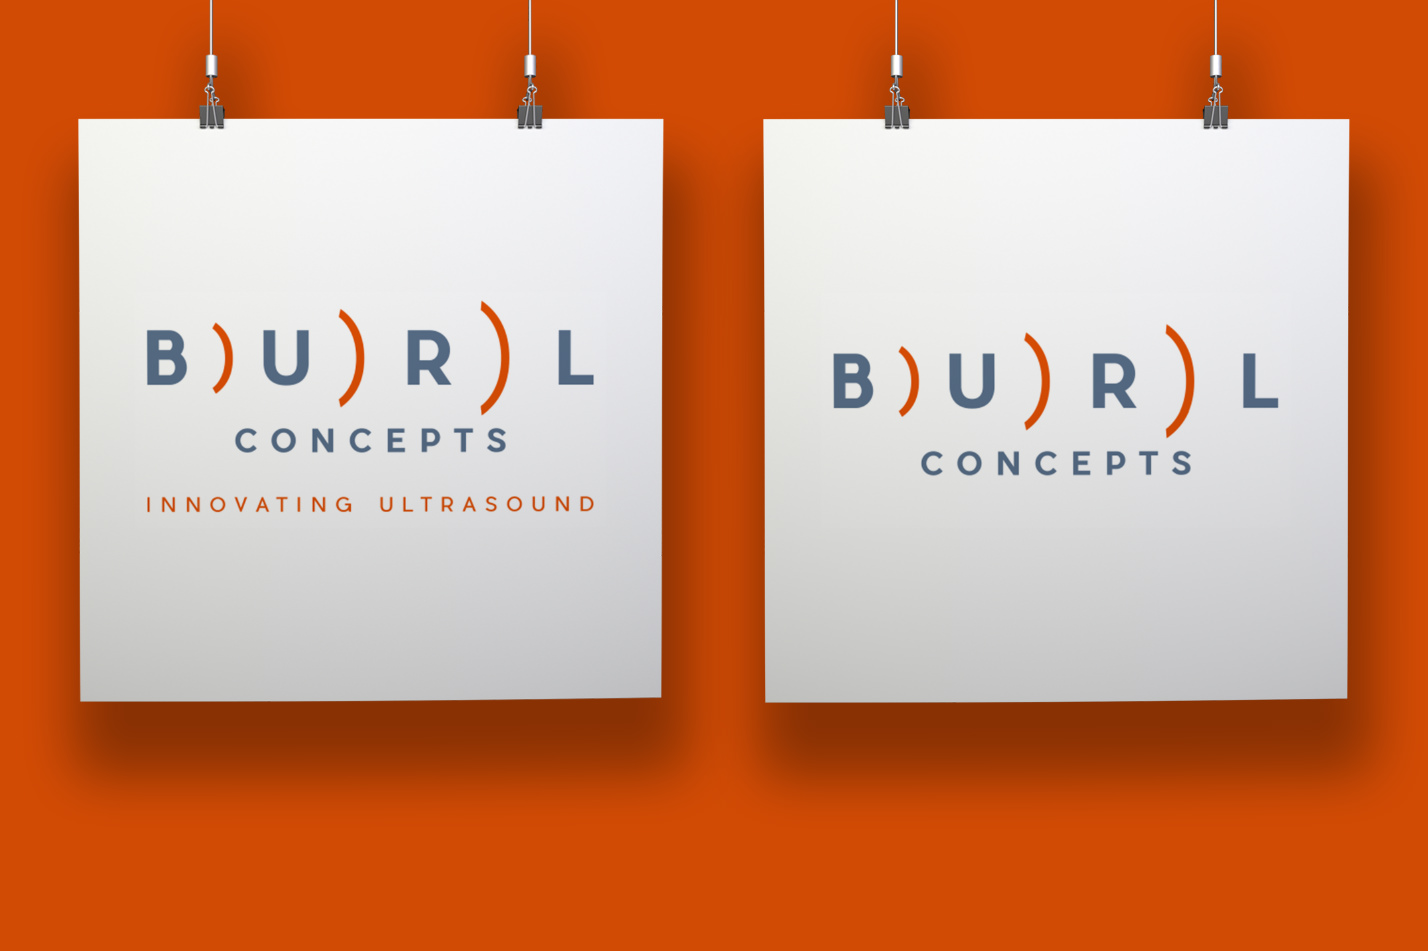 Burl concepts signage in front of orange wall